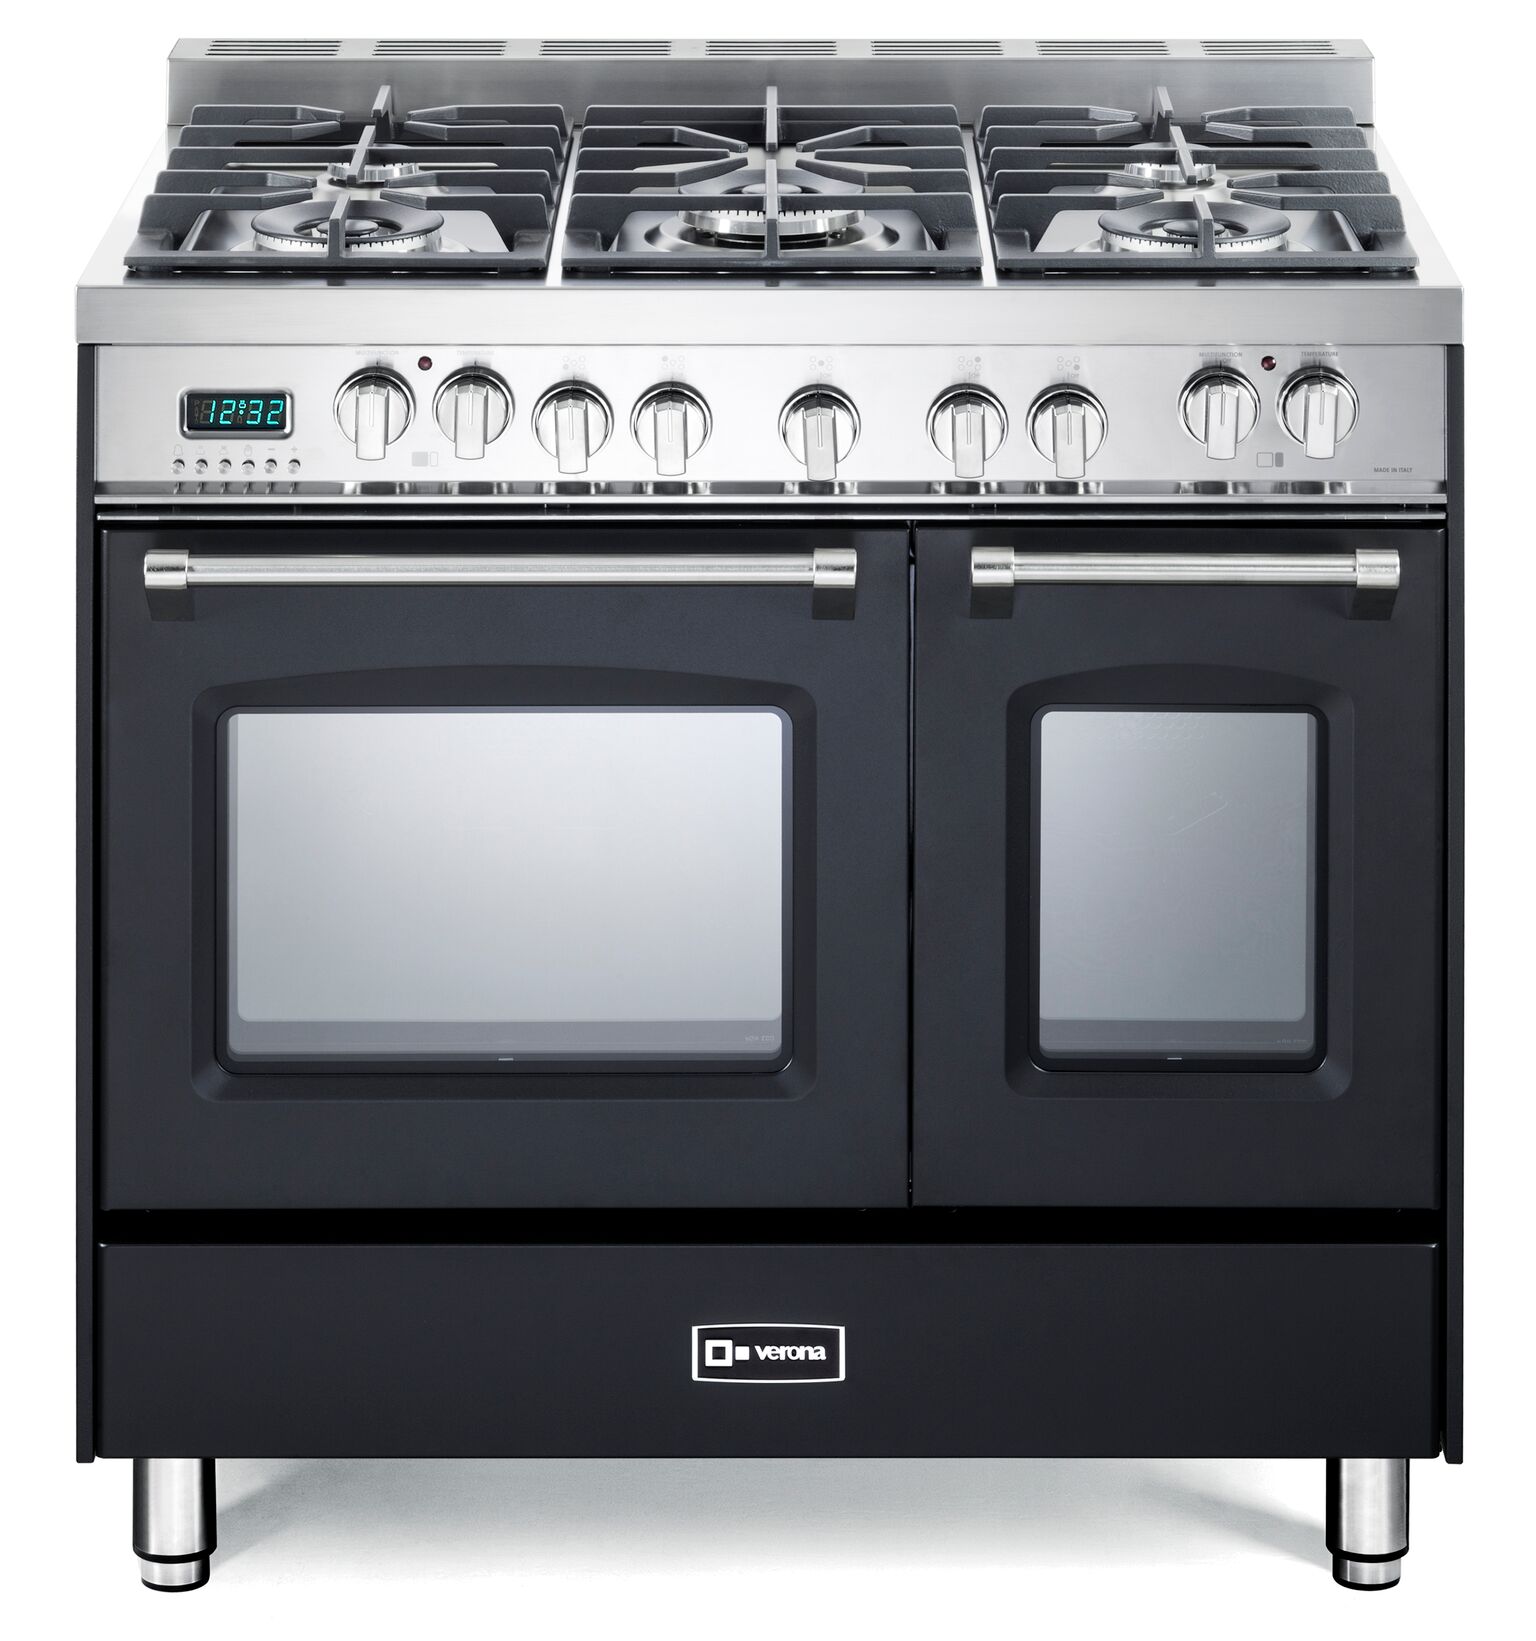 Verona Applicance Prestige high-powered Oven front view